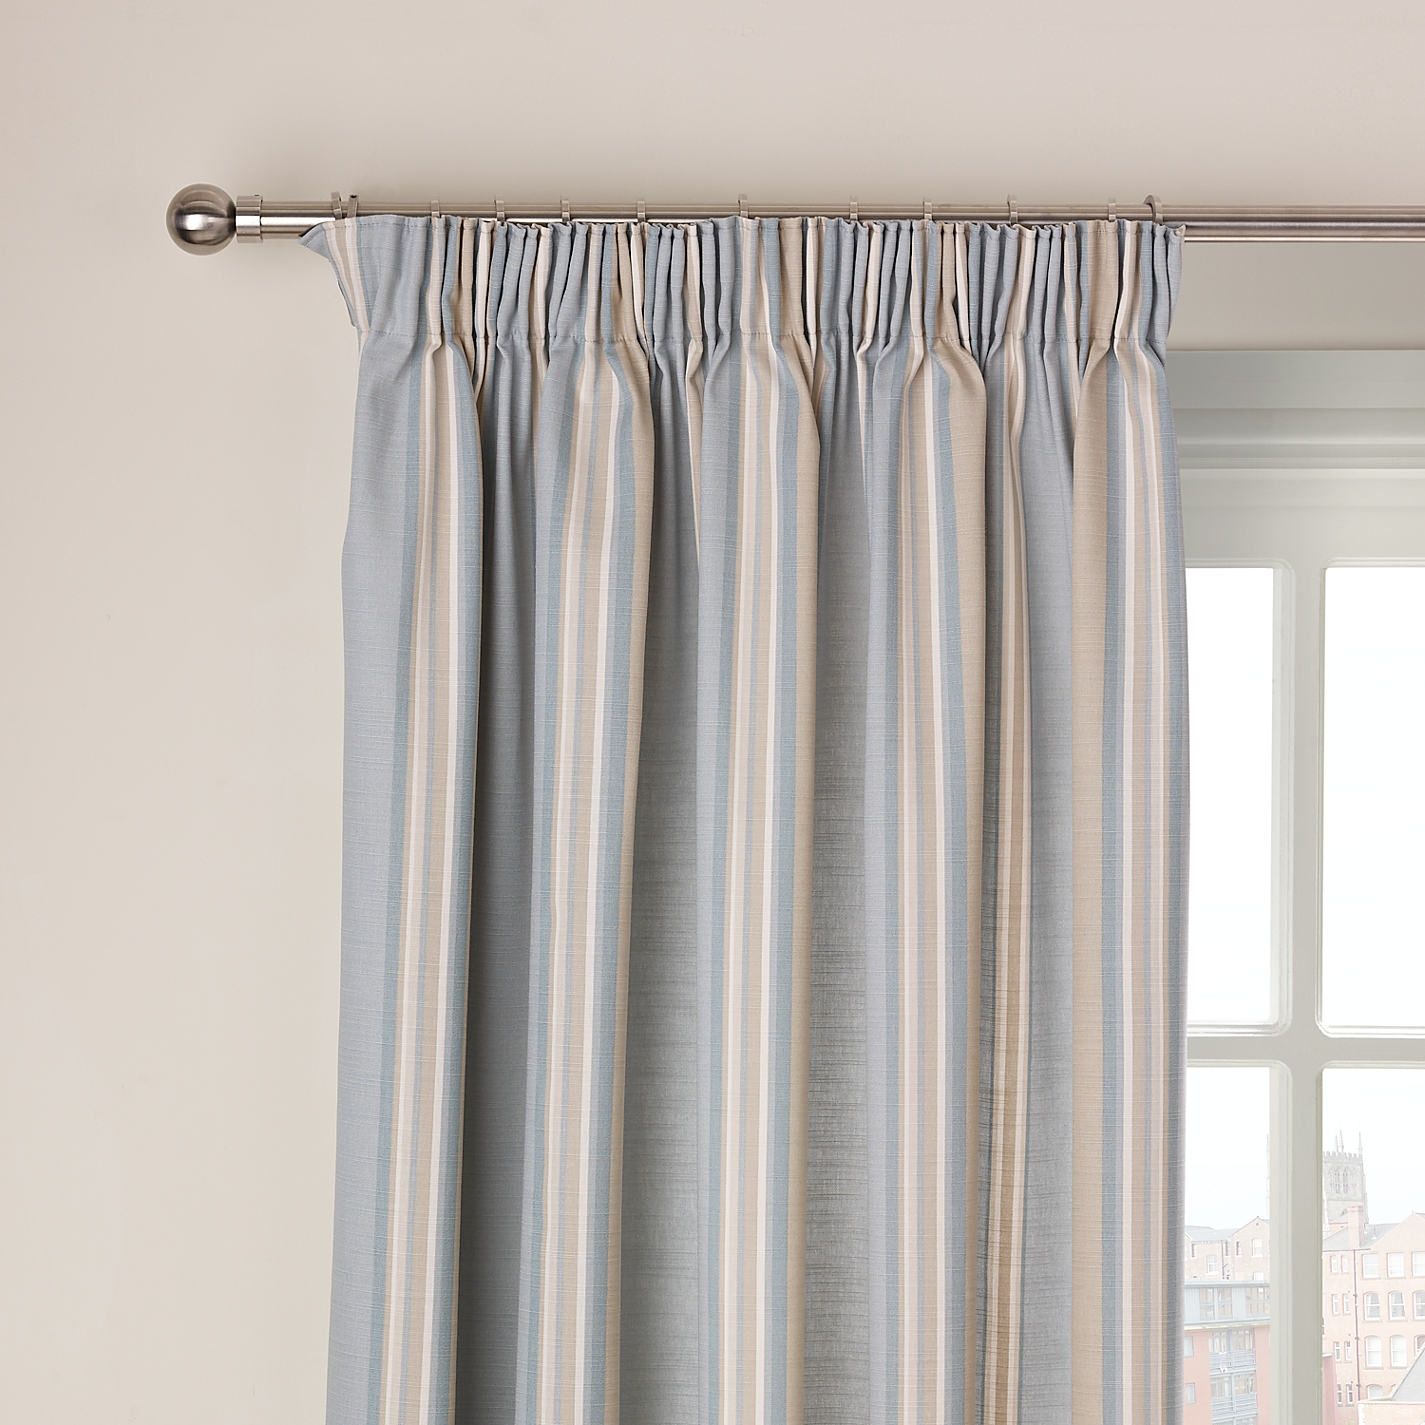 Pencil Pleat Curtains Buying Guides Egovjournal Home Inside Pencil Pleat Blackout Curtains (View 15 of 15)